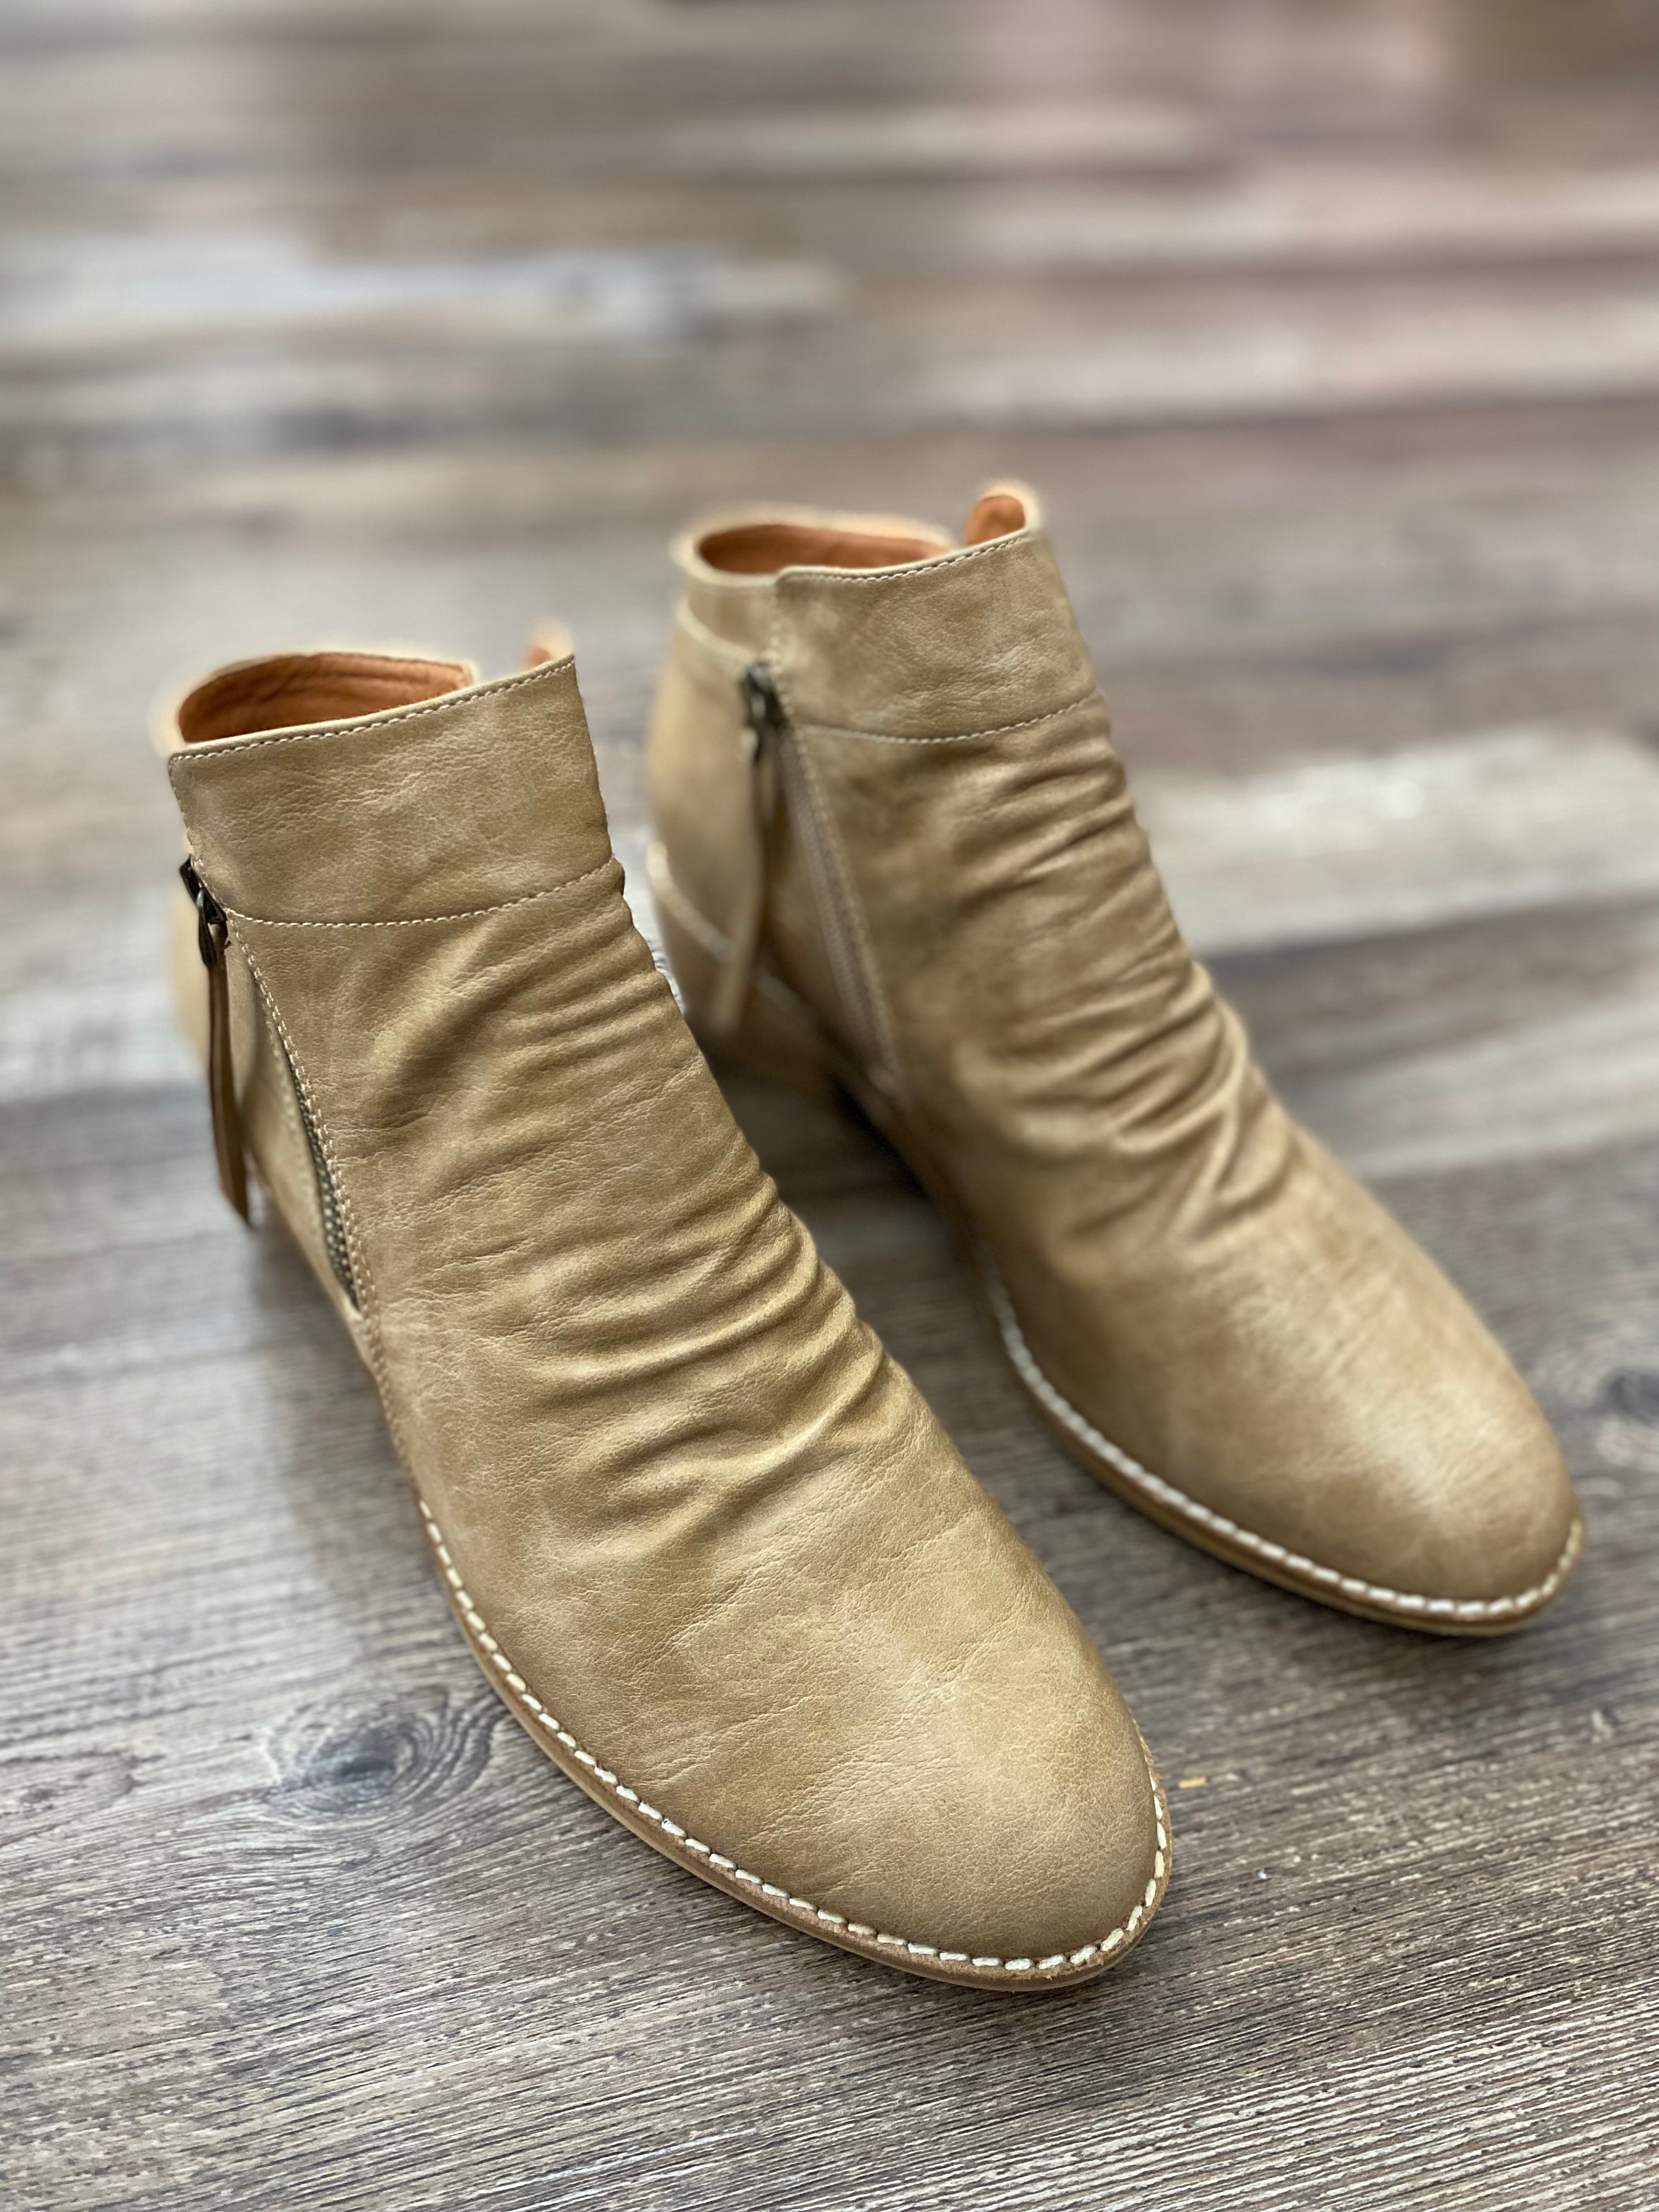 Butternut-Taupe Boots